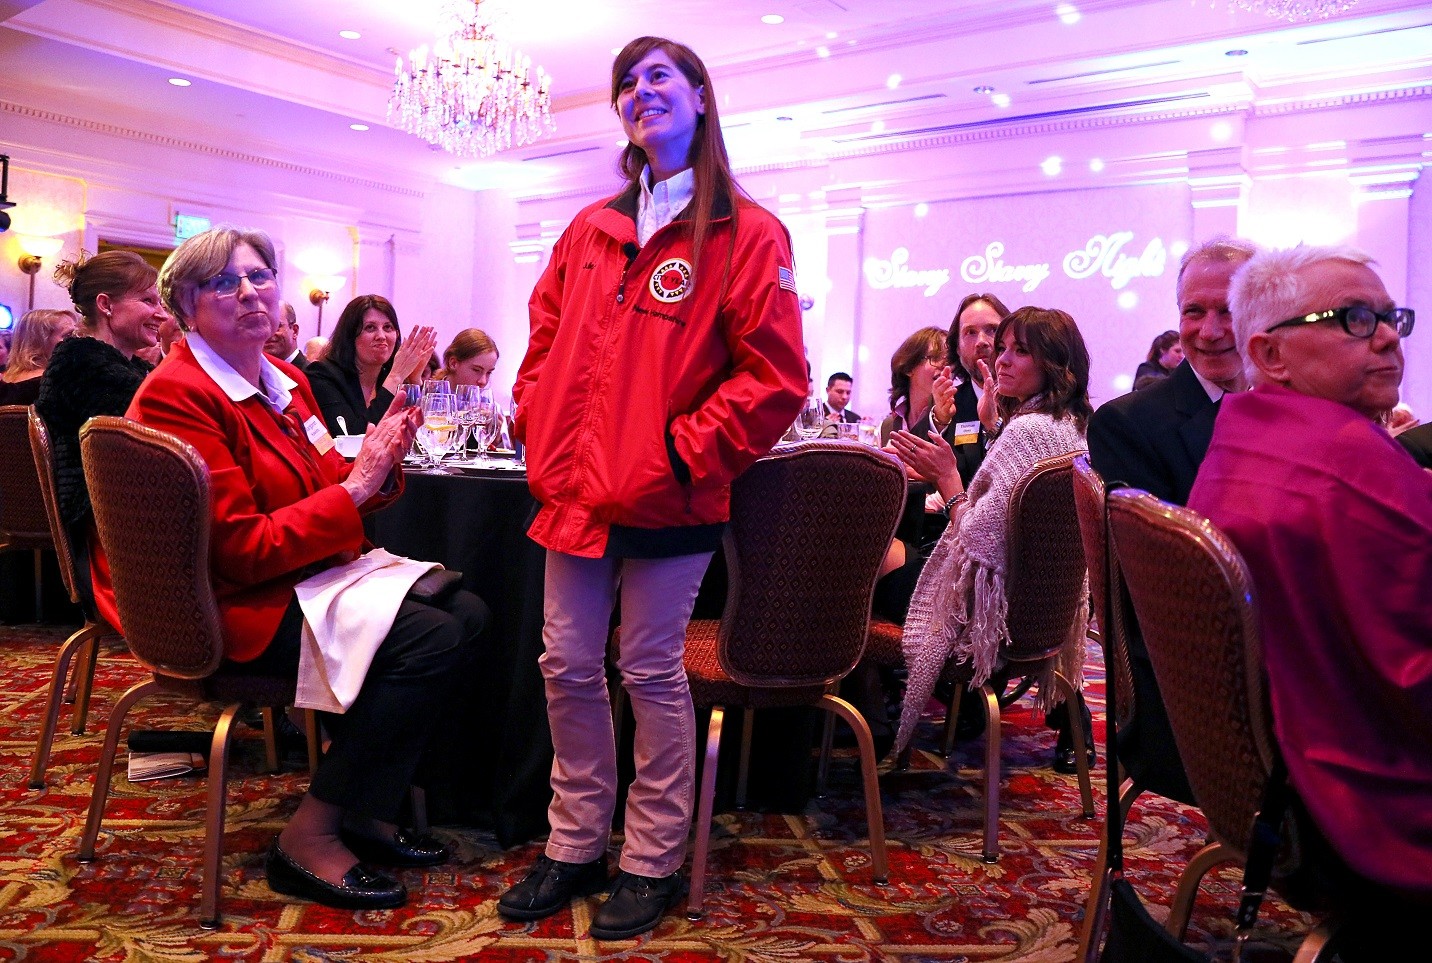 4. Julie Lavoie City Year VISTA member receiving an enthusiastic applaud from the crowd Edited